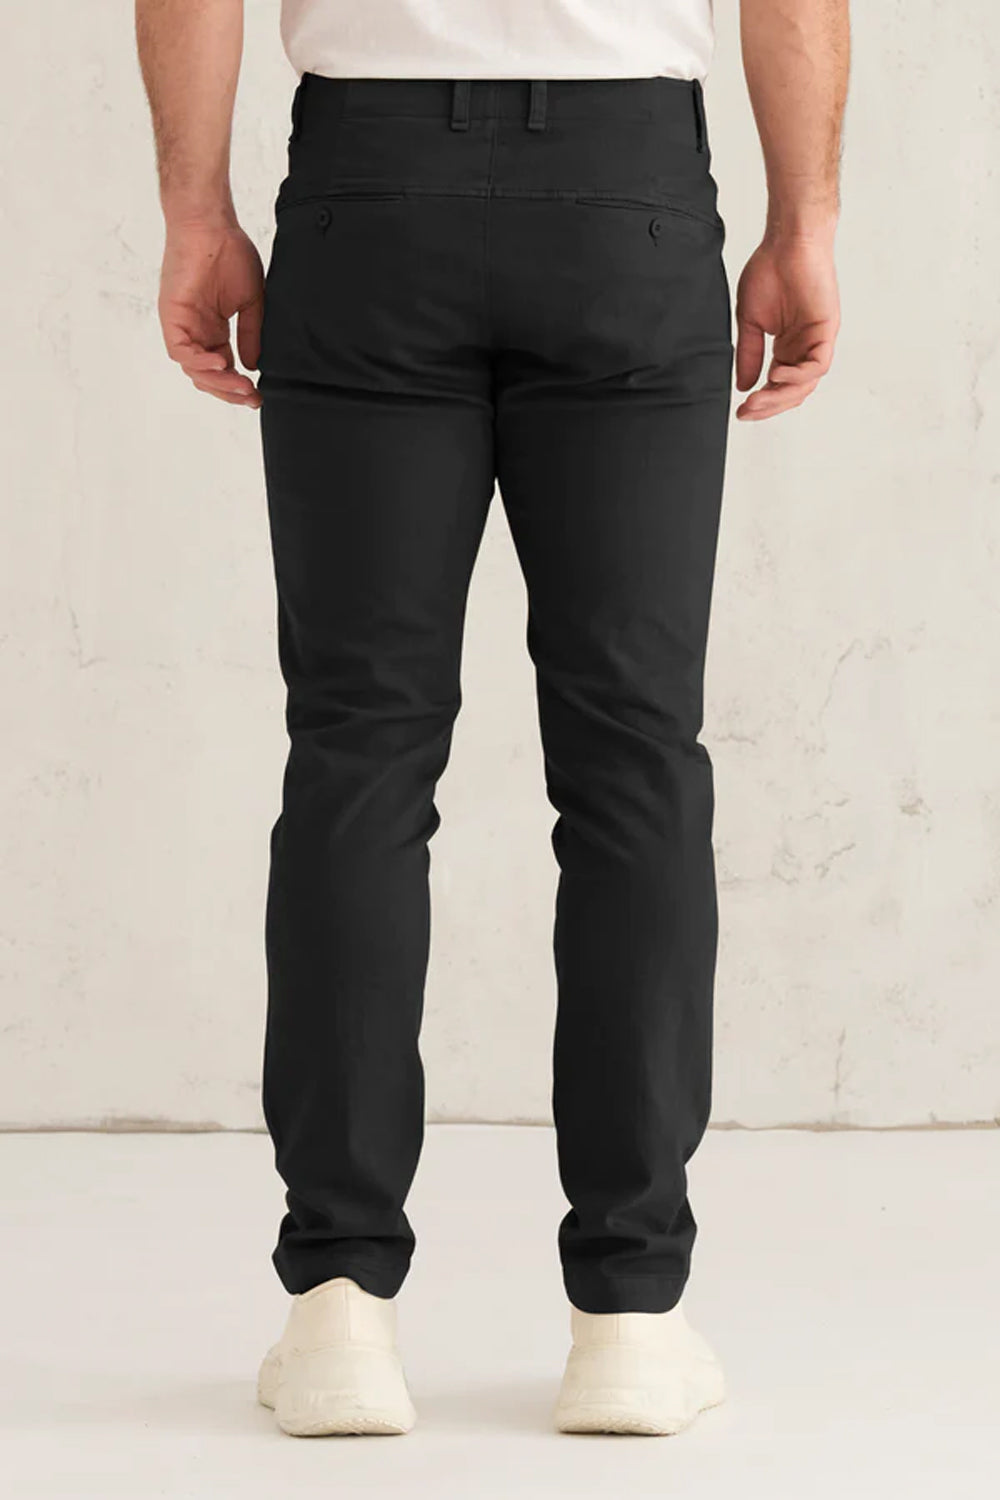 Buy the Transit Stretch Italian Cotton Chino Trousers in Black at Intro. Spend £50 for free UK delivery. Official stockists. We ship worldwide.